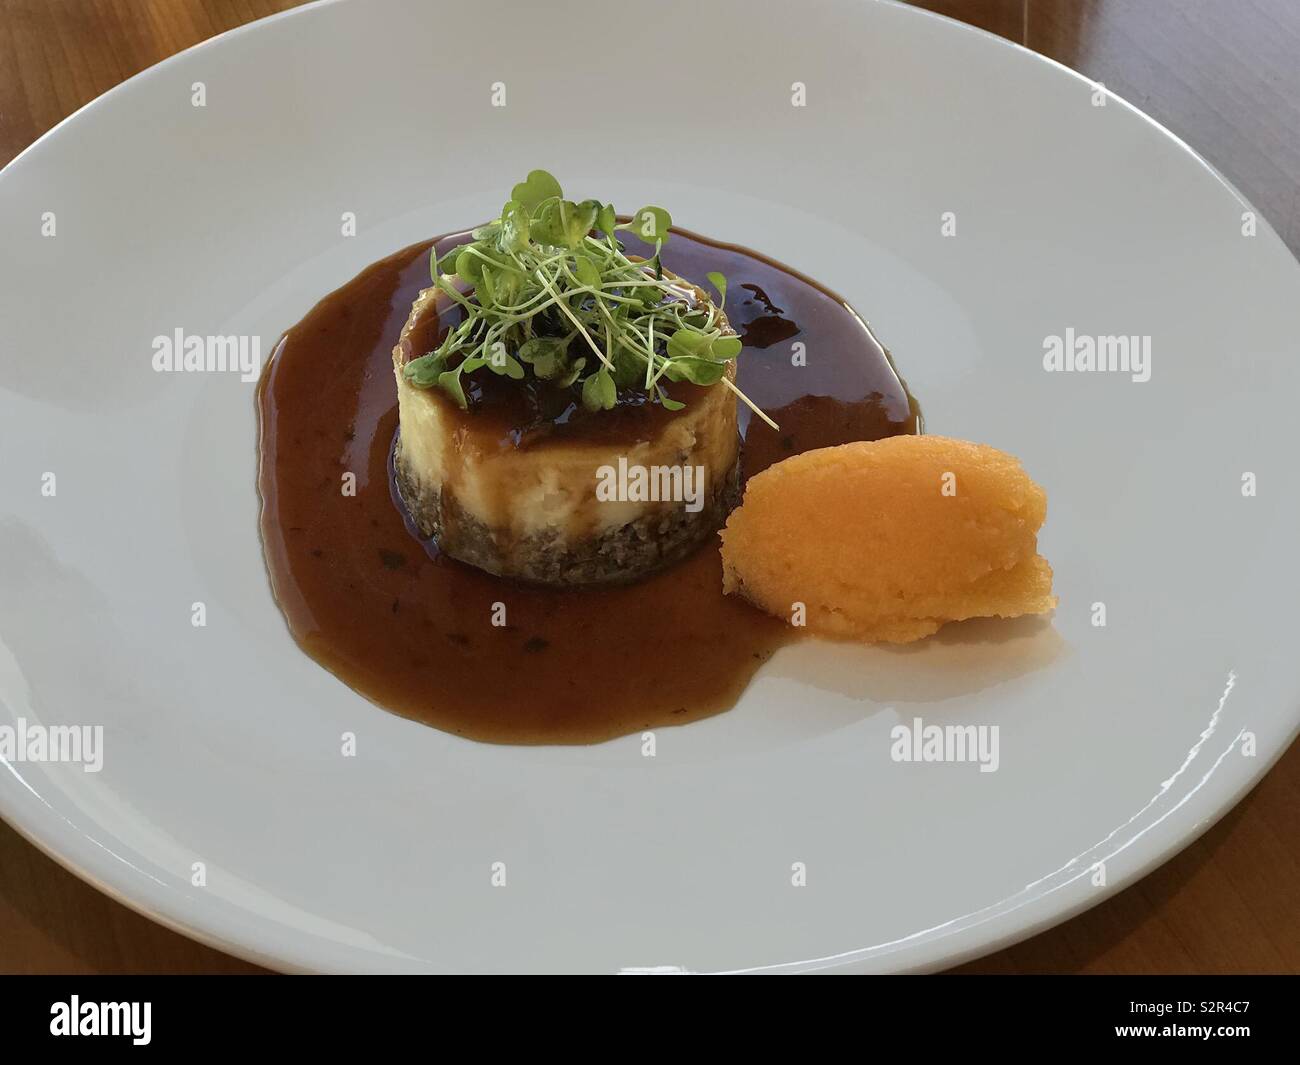 A traditional timbal of haggis and tatties (mashed potatoes), topped with watercress and with neeps (mashed rutabagas) on the side, is shown plated in a Scottish restaurant. Stock Photo